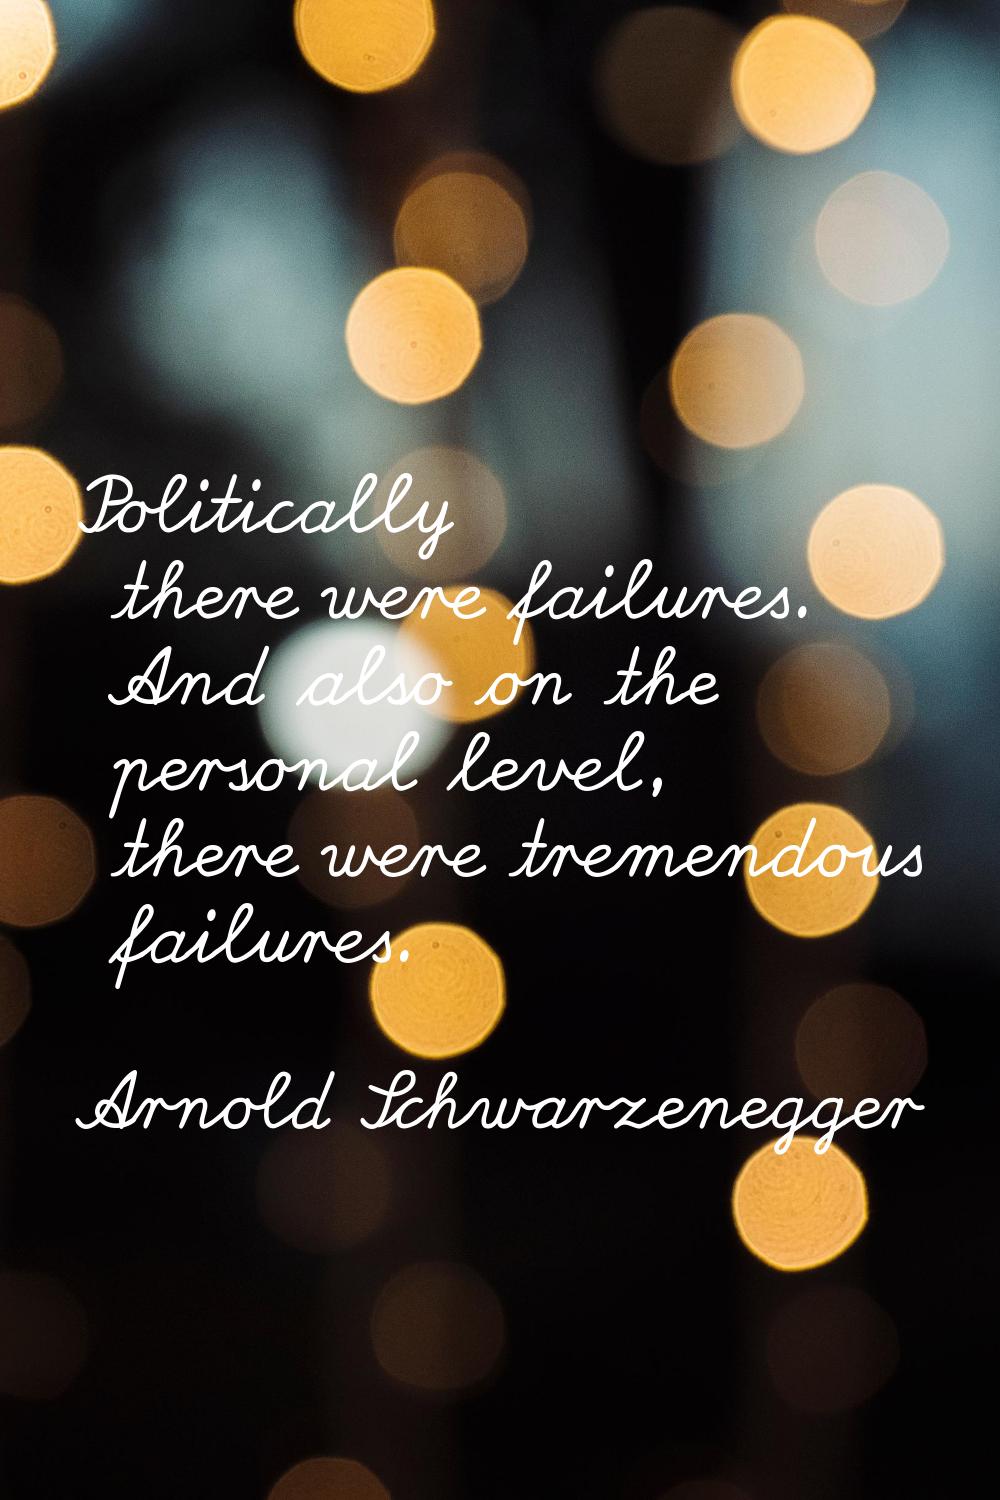 Politically there were failures. And also on the personal level, there were tremendous failures.